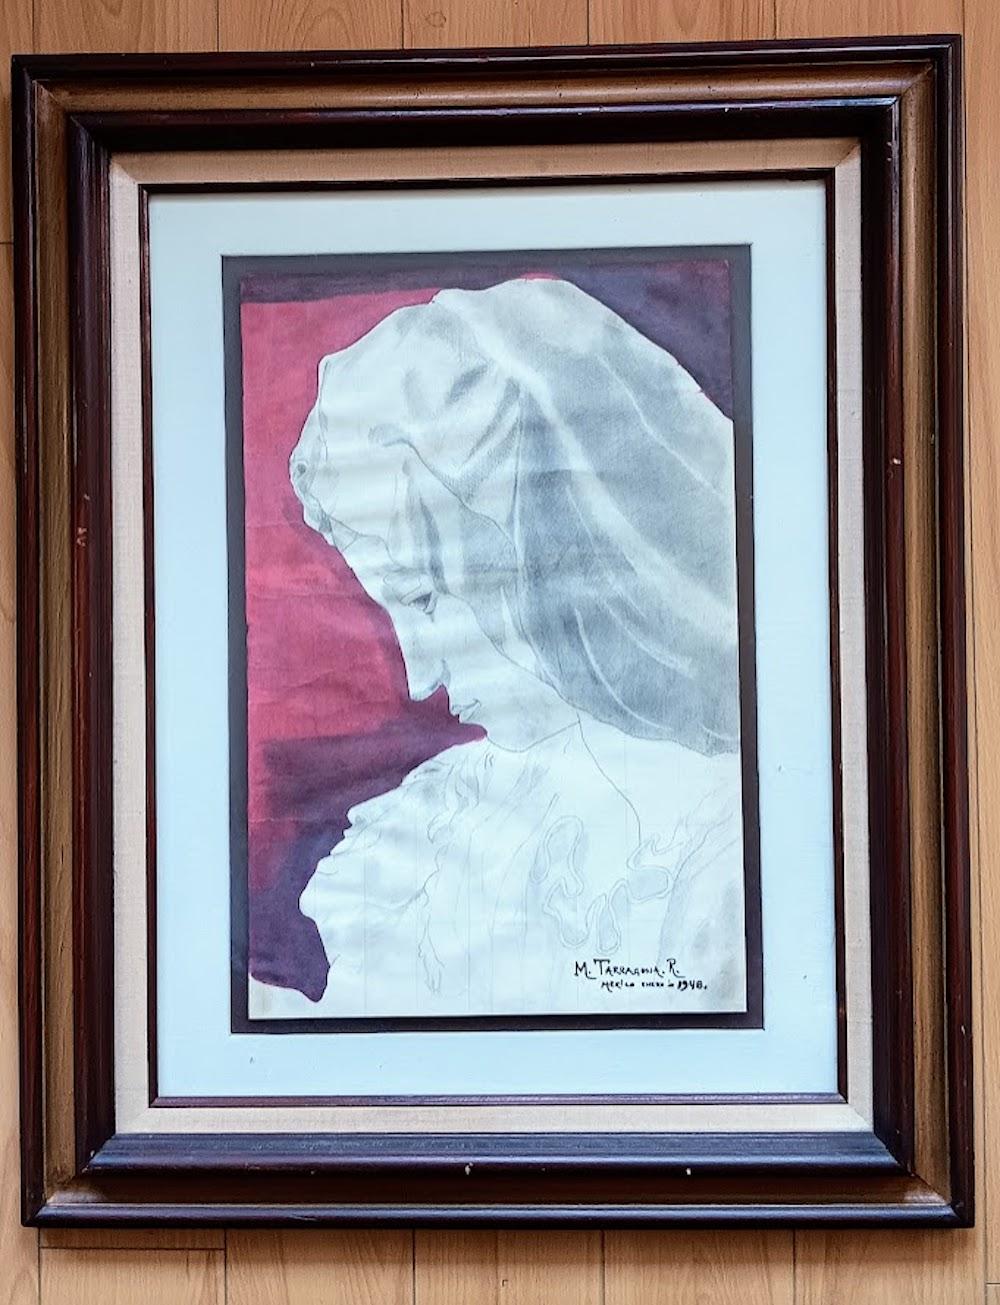 Portrait of a Couple by M. Tarragona R. Drawing Signed and Dated in Mexico, 1948 For Sale 4